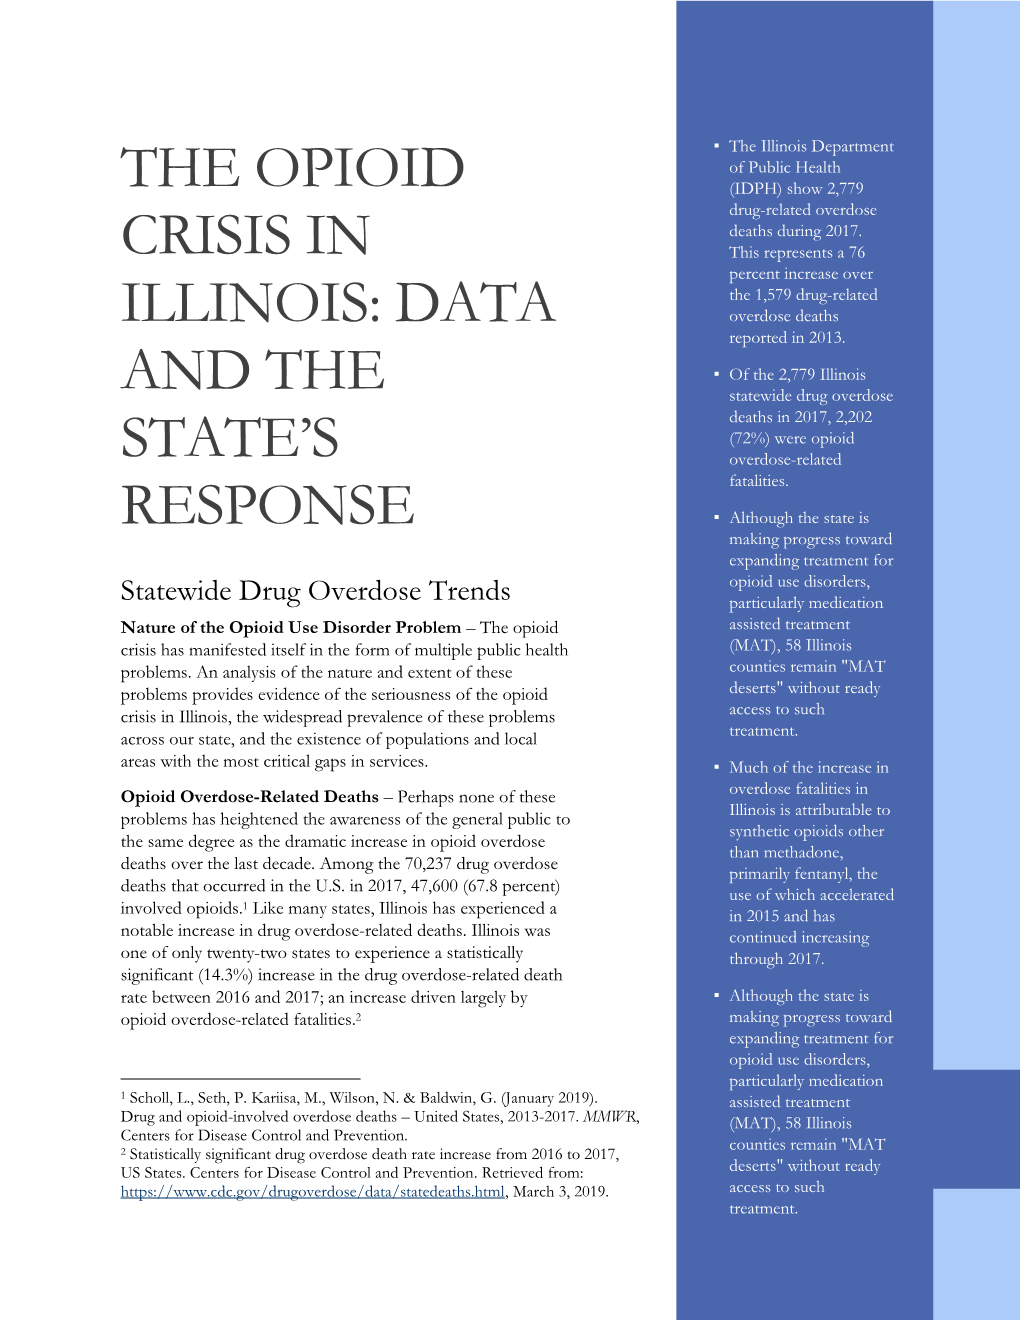 The Opioid Crisis in Illinois: Data and the State's Response